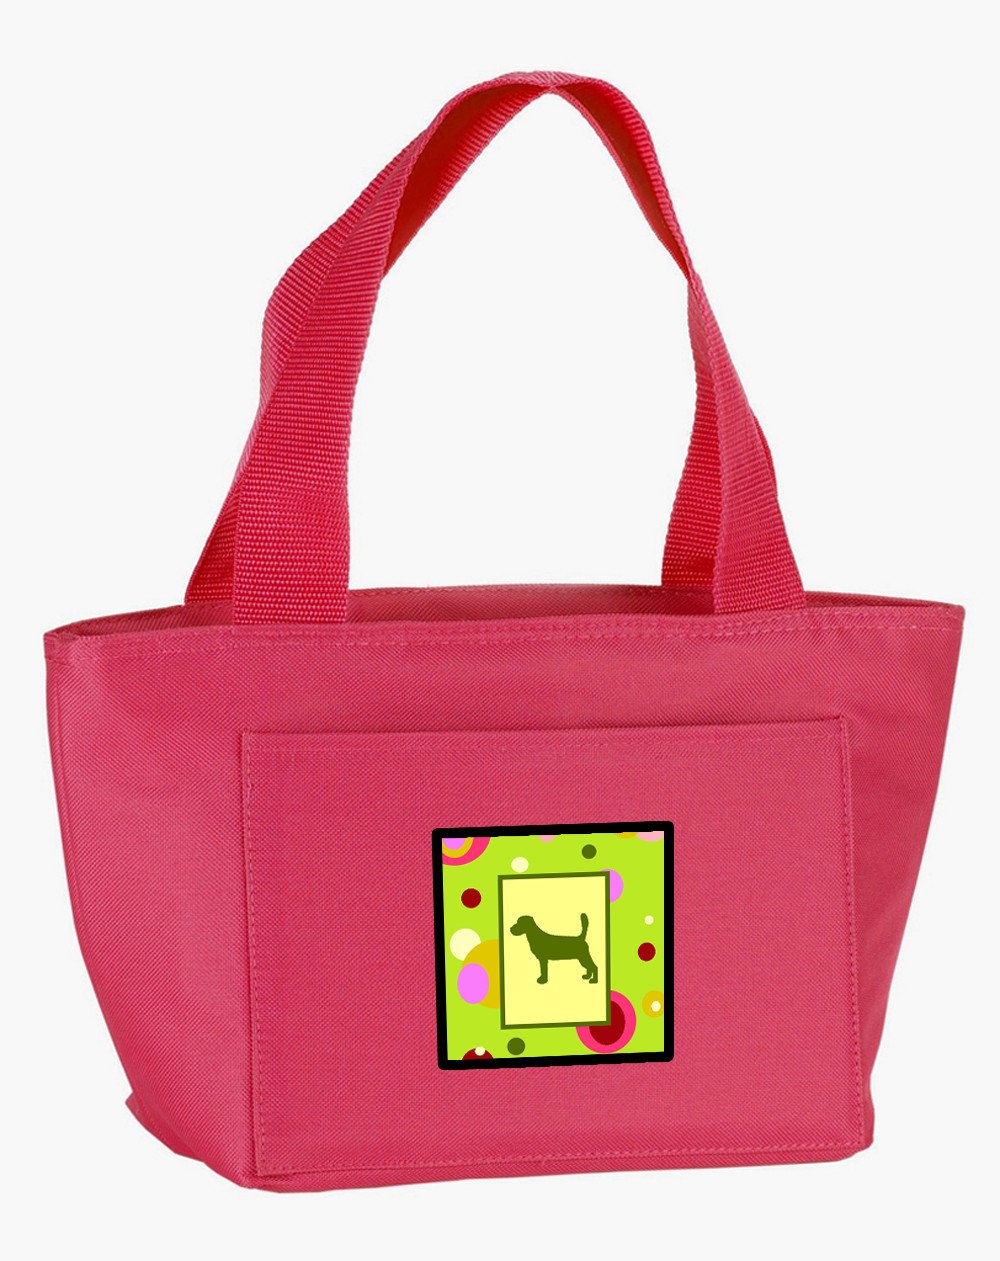 Lime Green Dots Beagle Lunch Bag CK1012PK-8808 by Caroline's Treasures